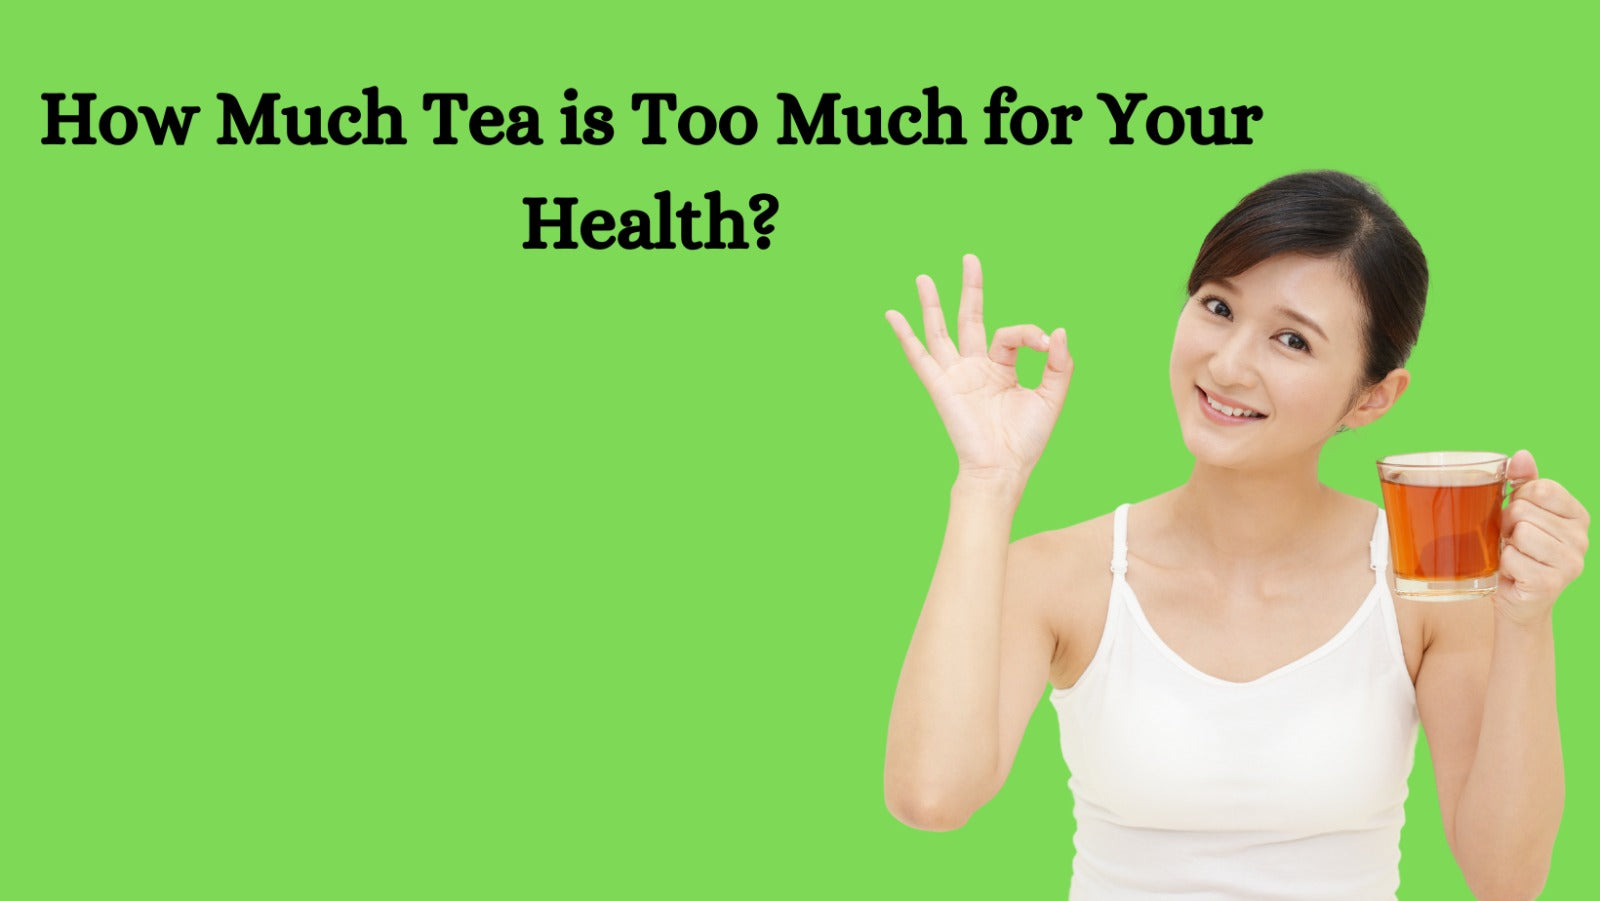 How Much Tea is Too Much for Your Health?